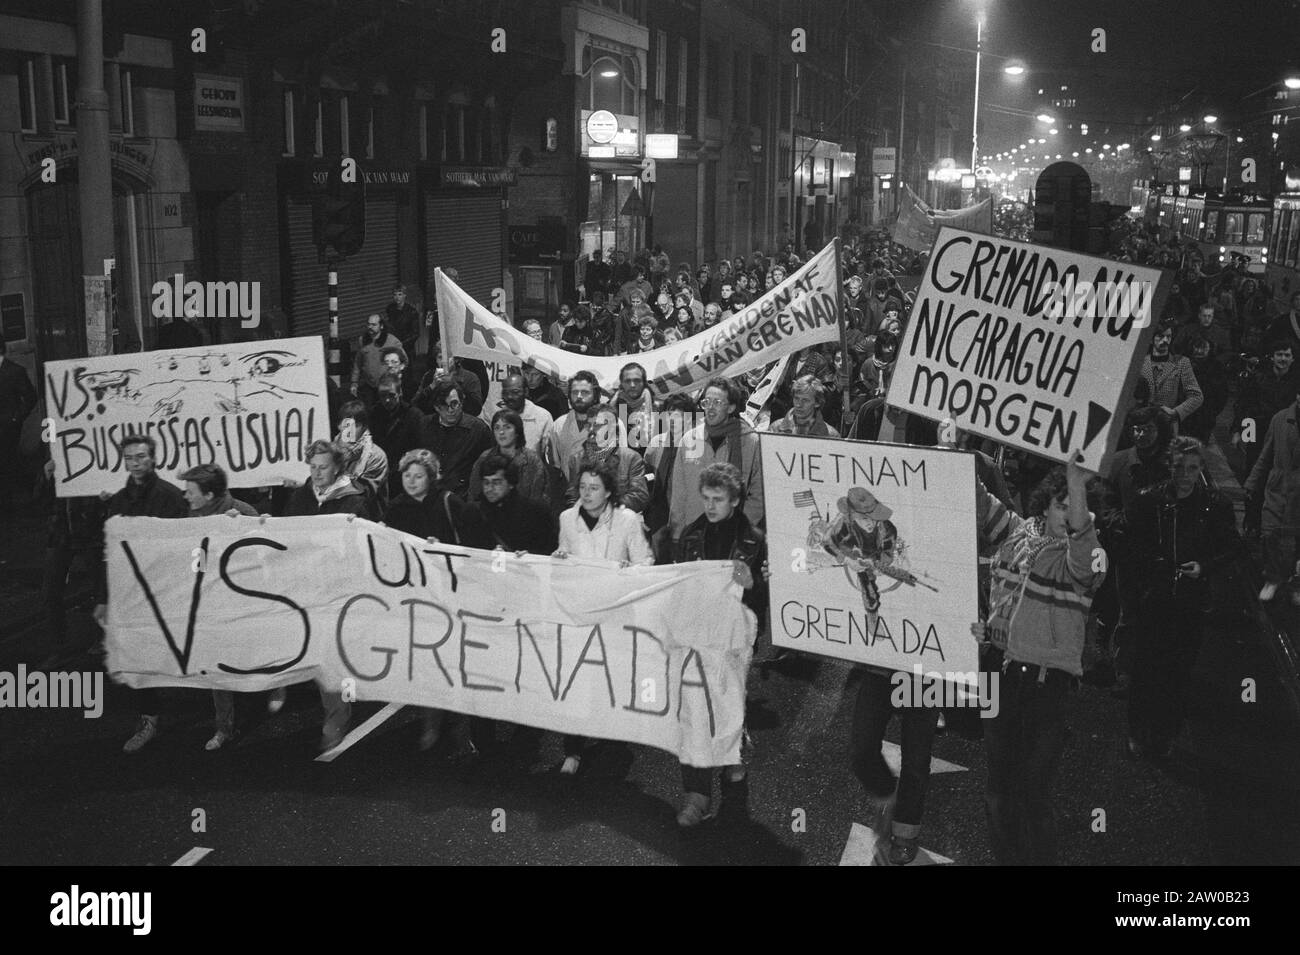 Demonstration in Amsterdam against the US invasion of Grenada after a coup Date: October 25, 1983 Location: Amsterdam, Noord-Holland Keywords: demonstrations, military operations, parades, banners Stock Photo